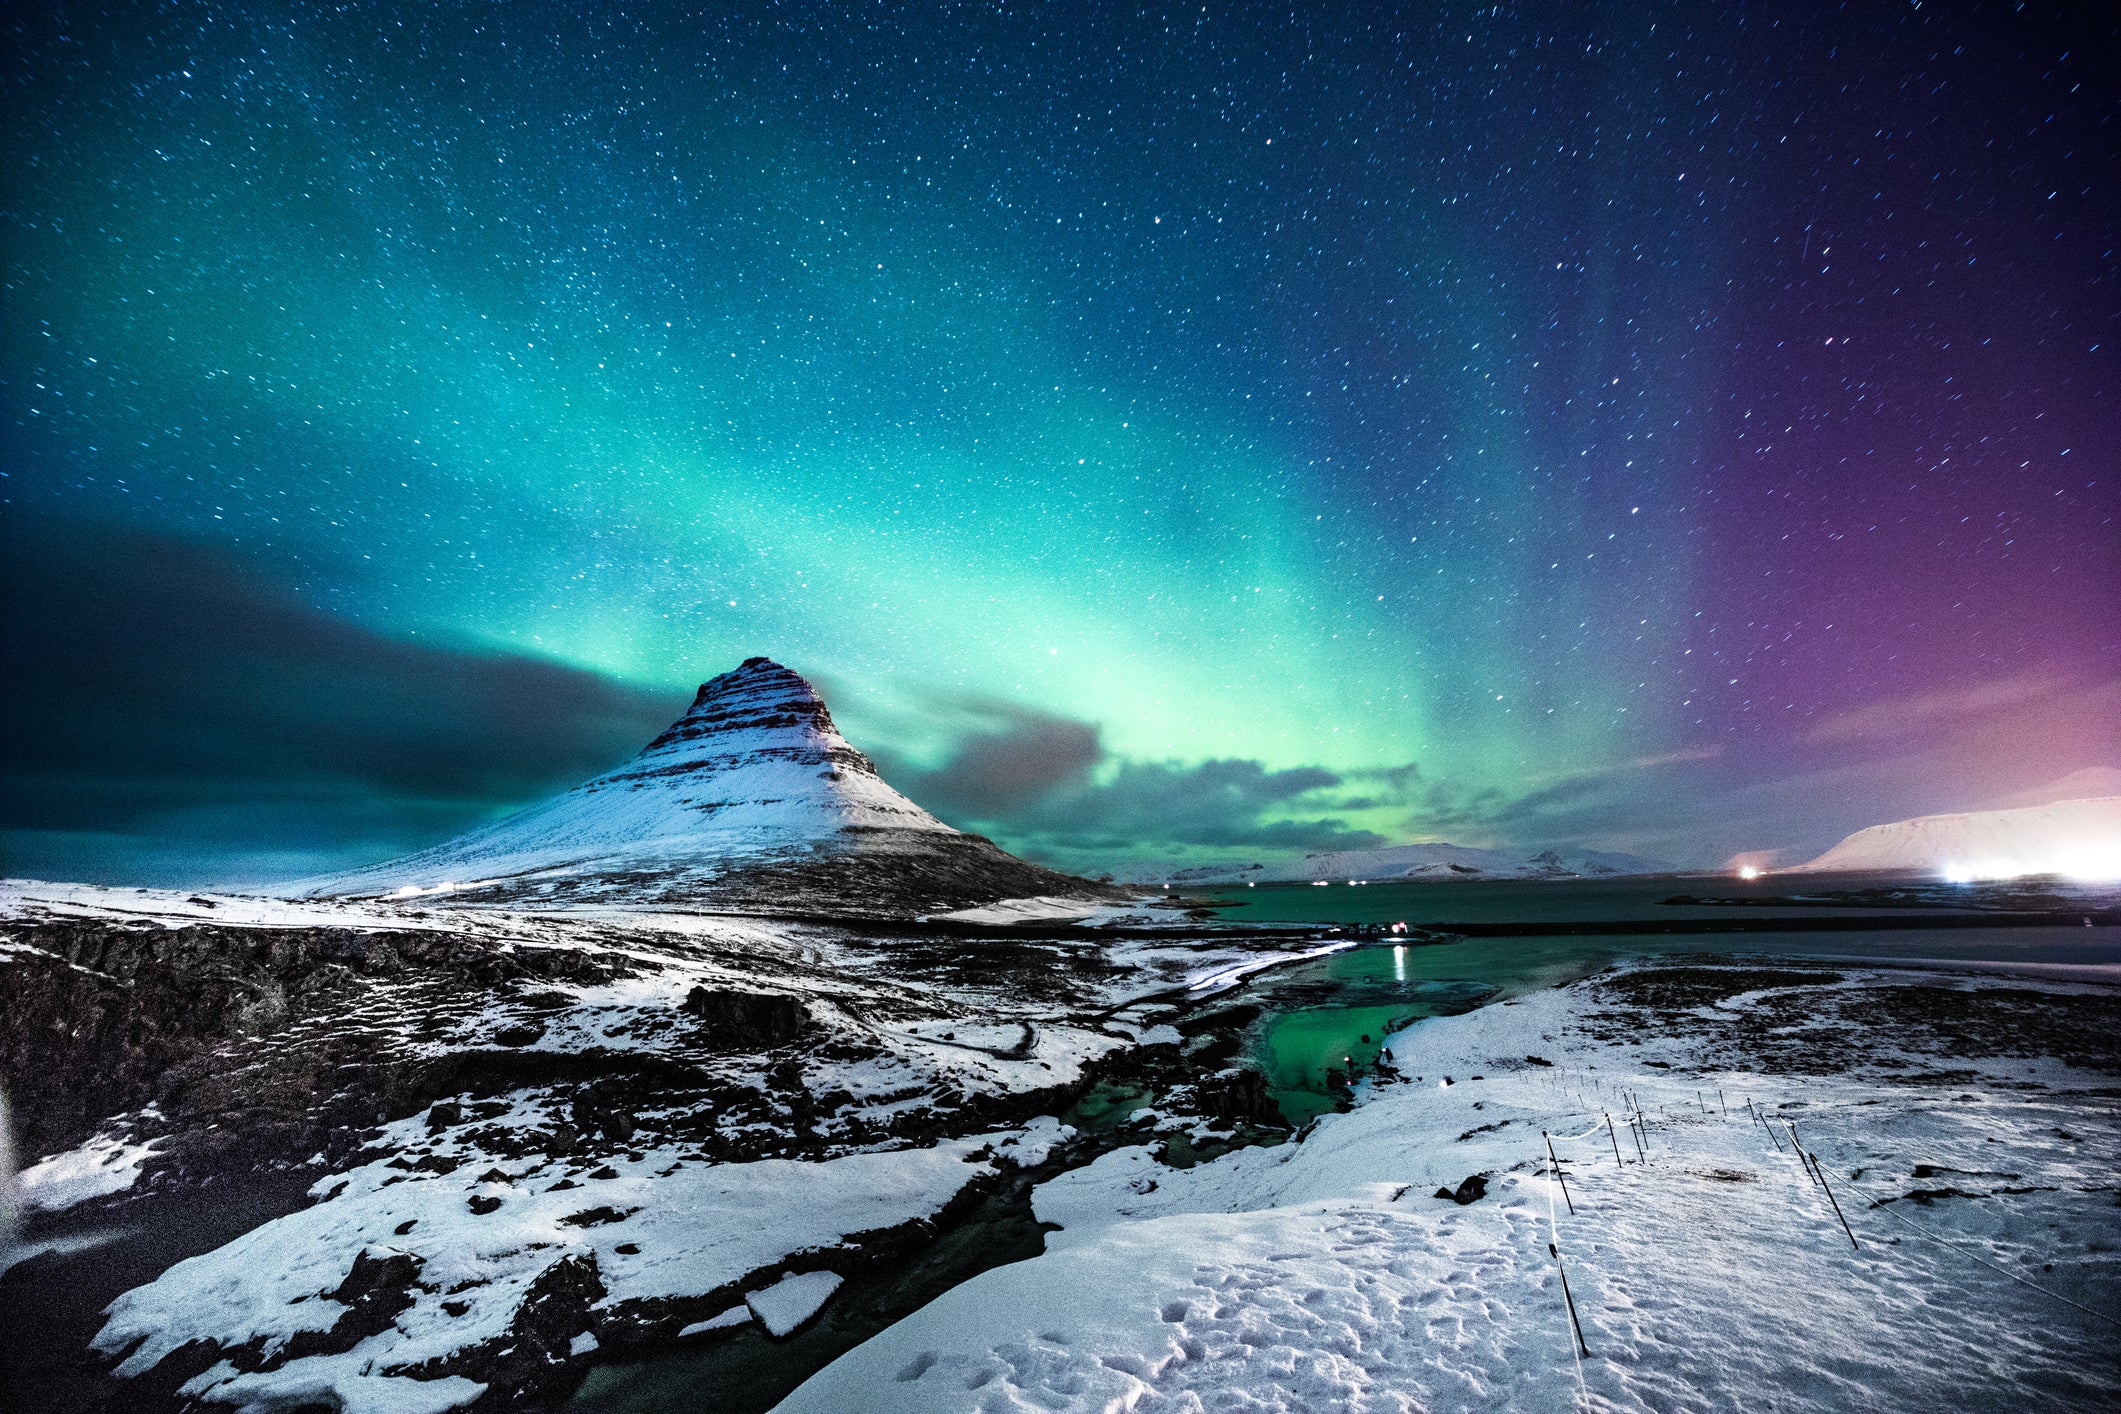 The remote Mount Kirkjufell has zero light pollution for clear Northern Lights viewing